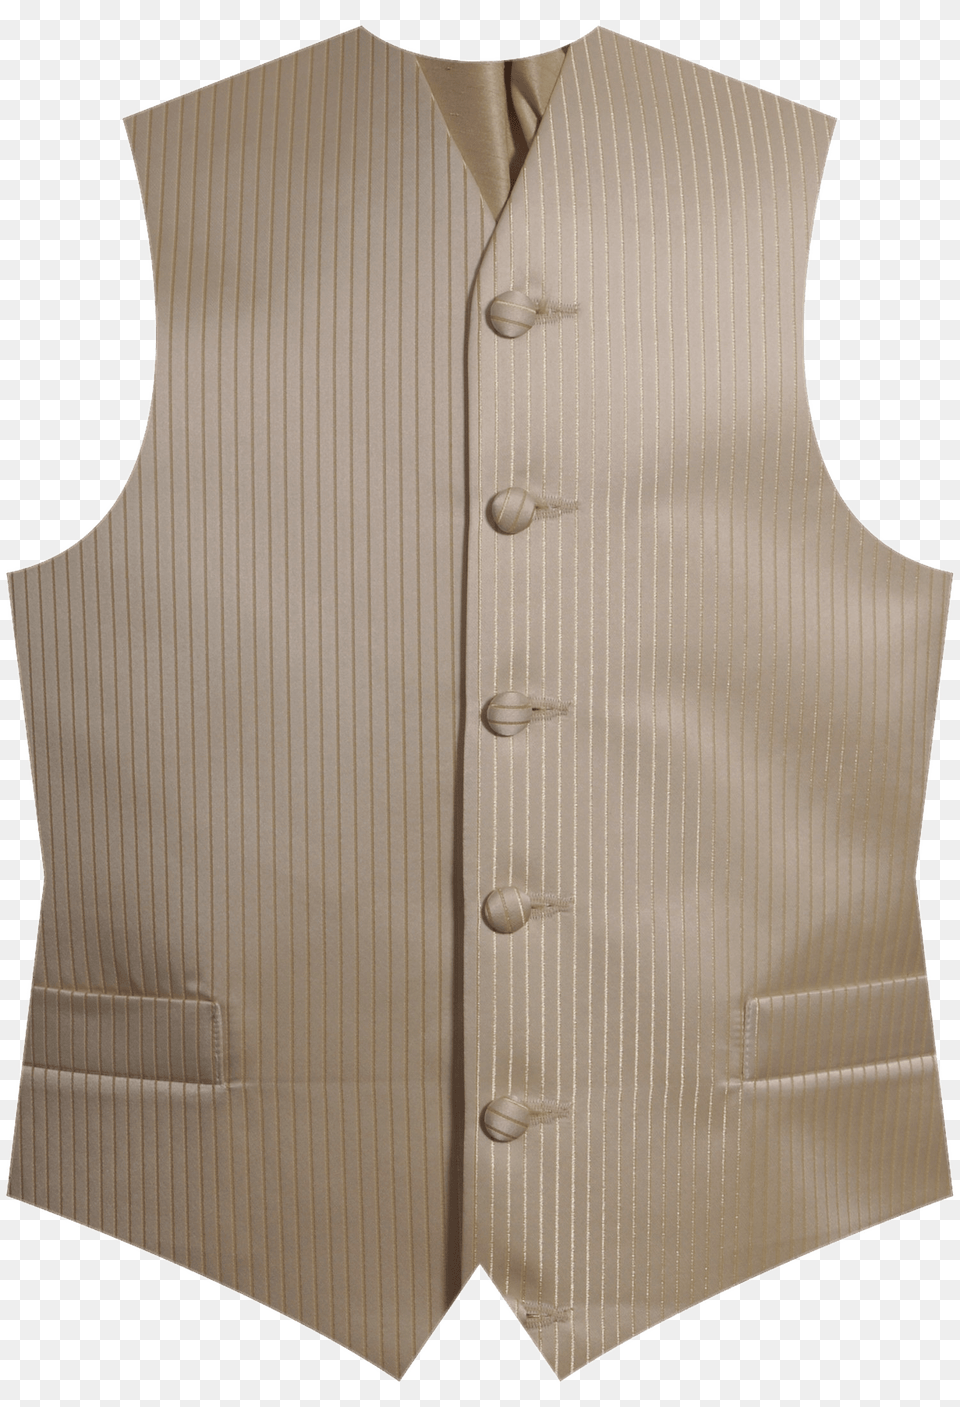 Wedding Waistcoat With Closed Buttons, Clothing, Lifejacket, Vest Png